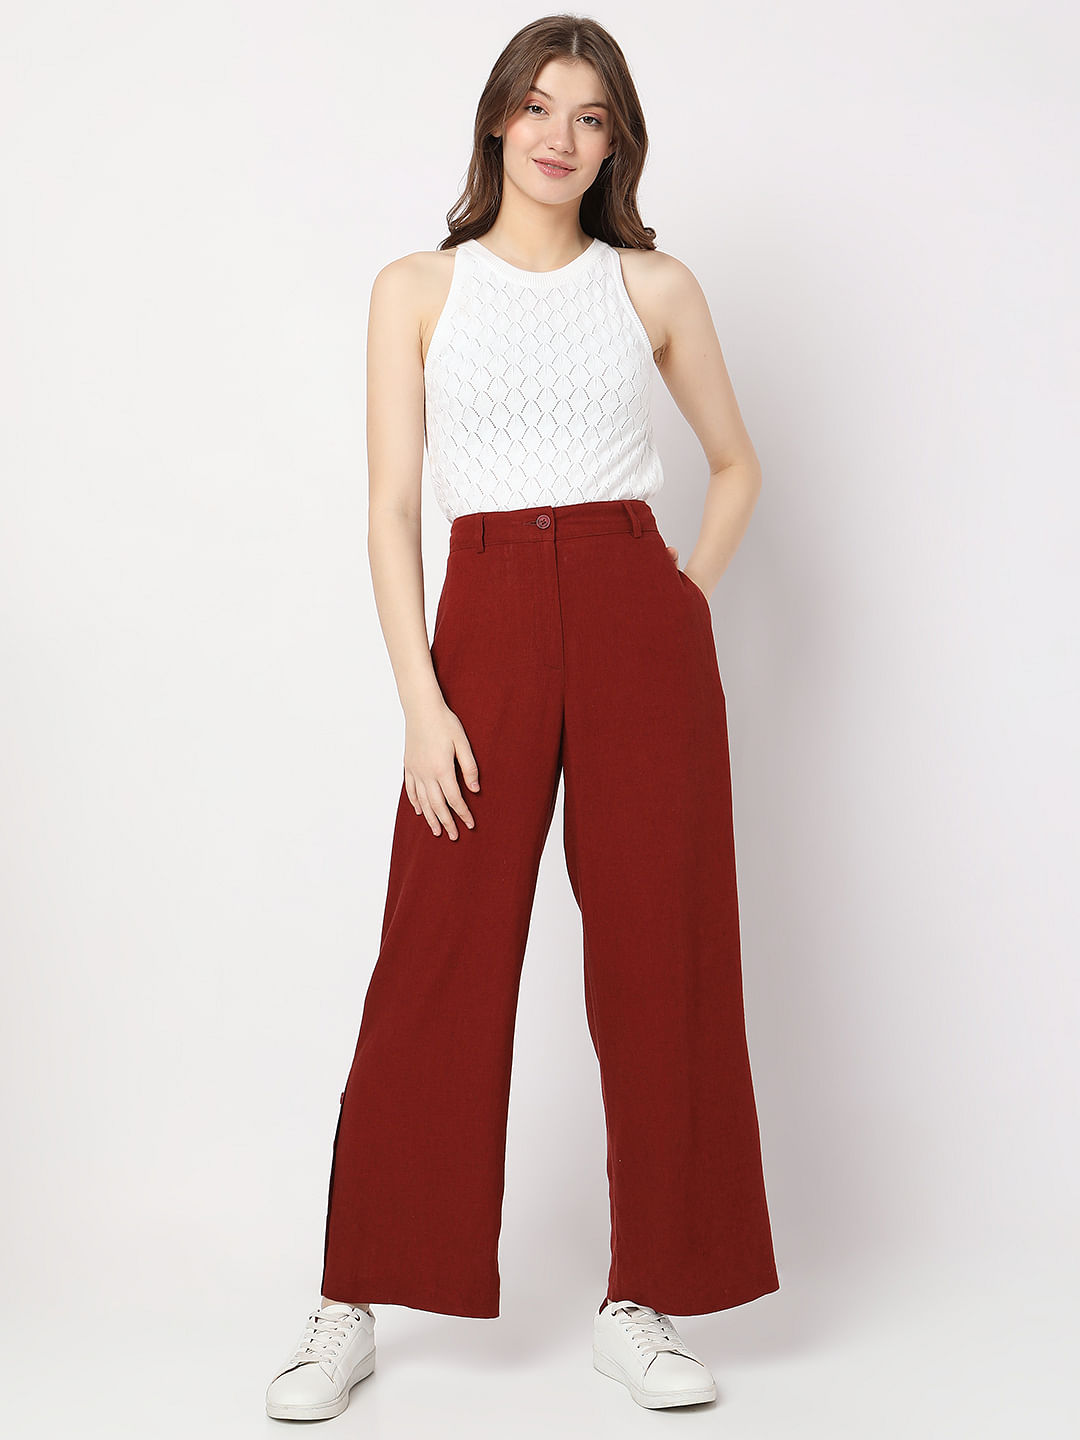 Coccinella Buttoned High Waist Trousers available only at Shivan and Narresh